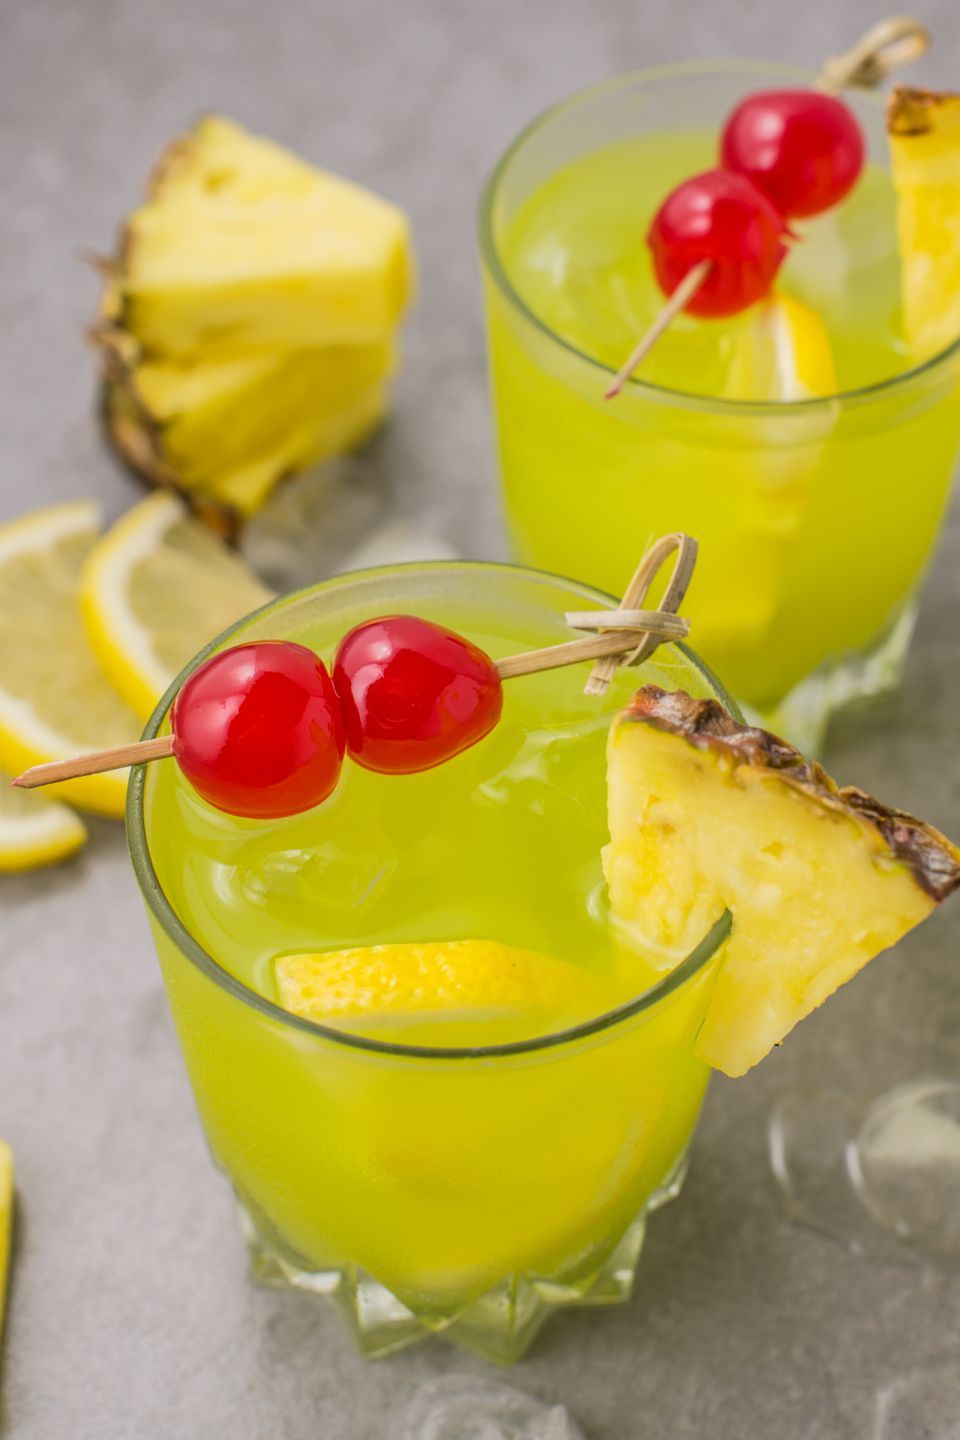 Pearl Harbor Cocktail Recipe: A Pineapple Vodka Drink ...